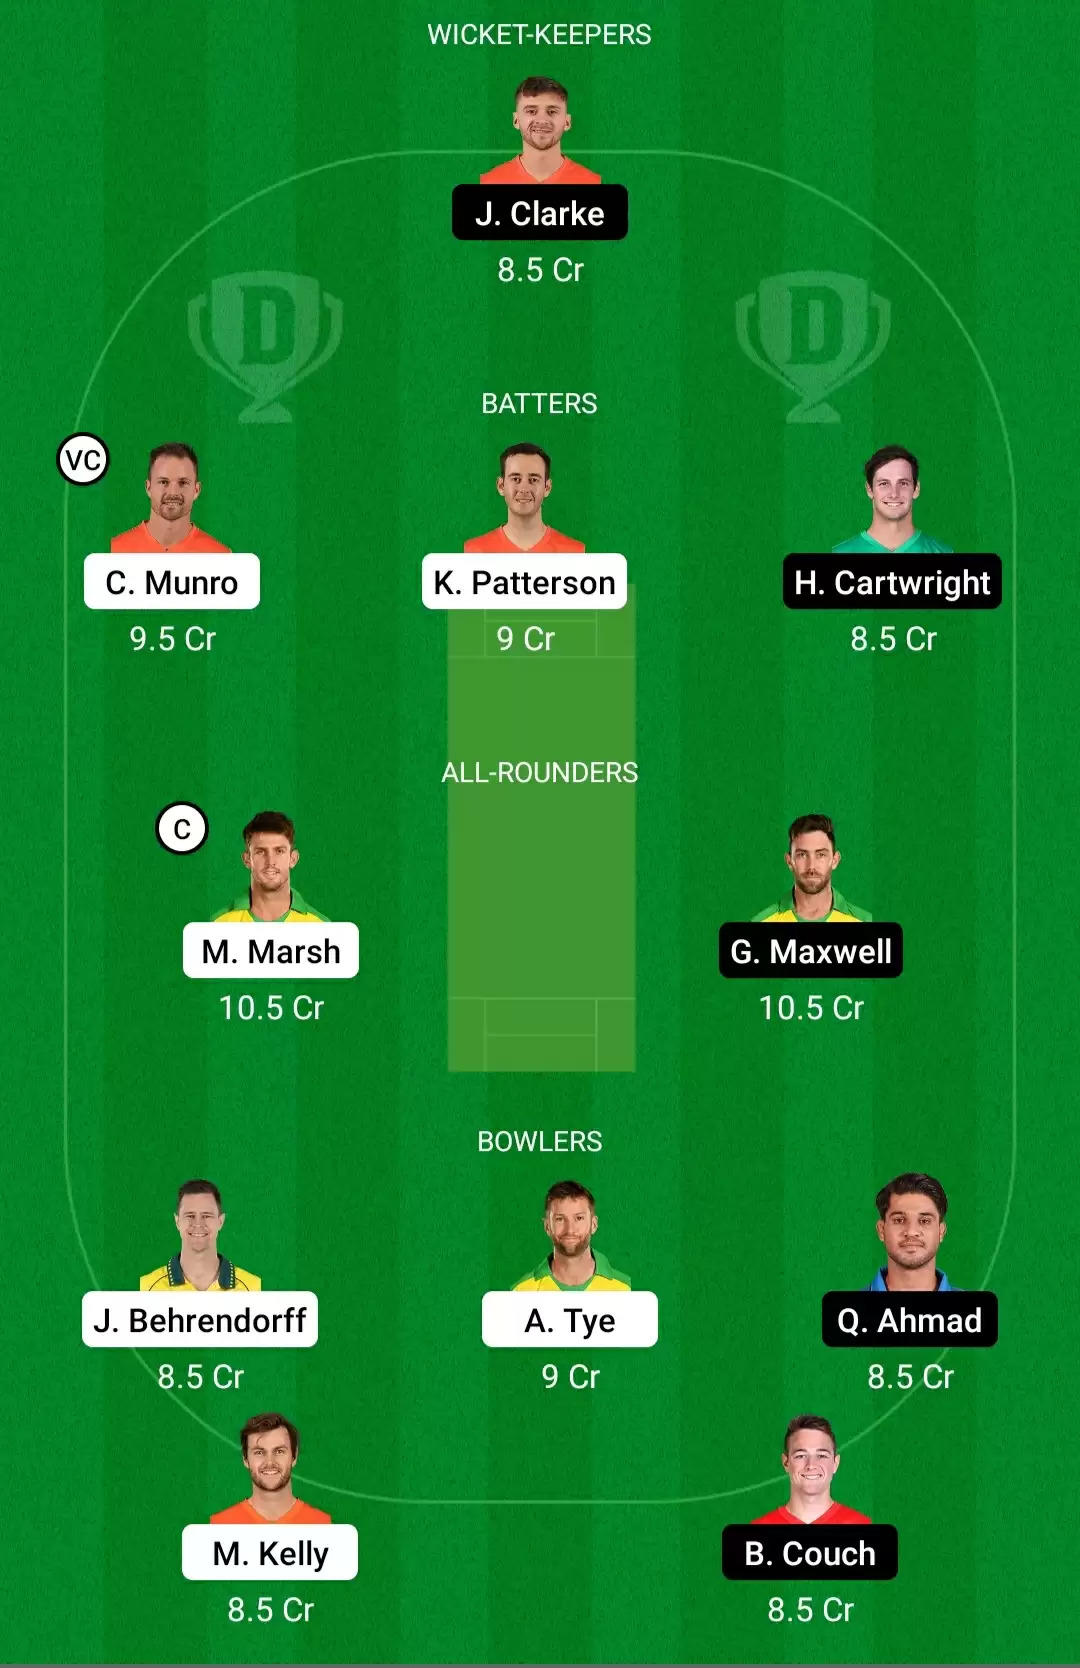 SCO vs STA Dream11 Prediction, BBL 2021-22, Match 27: Playing XI, Fantasy Cricket Tips, Team, Weather Updates and Pitch Report